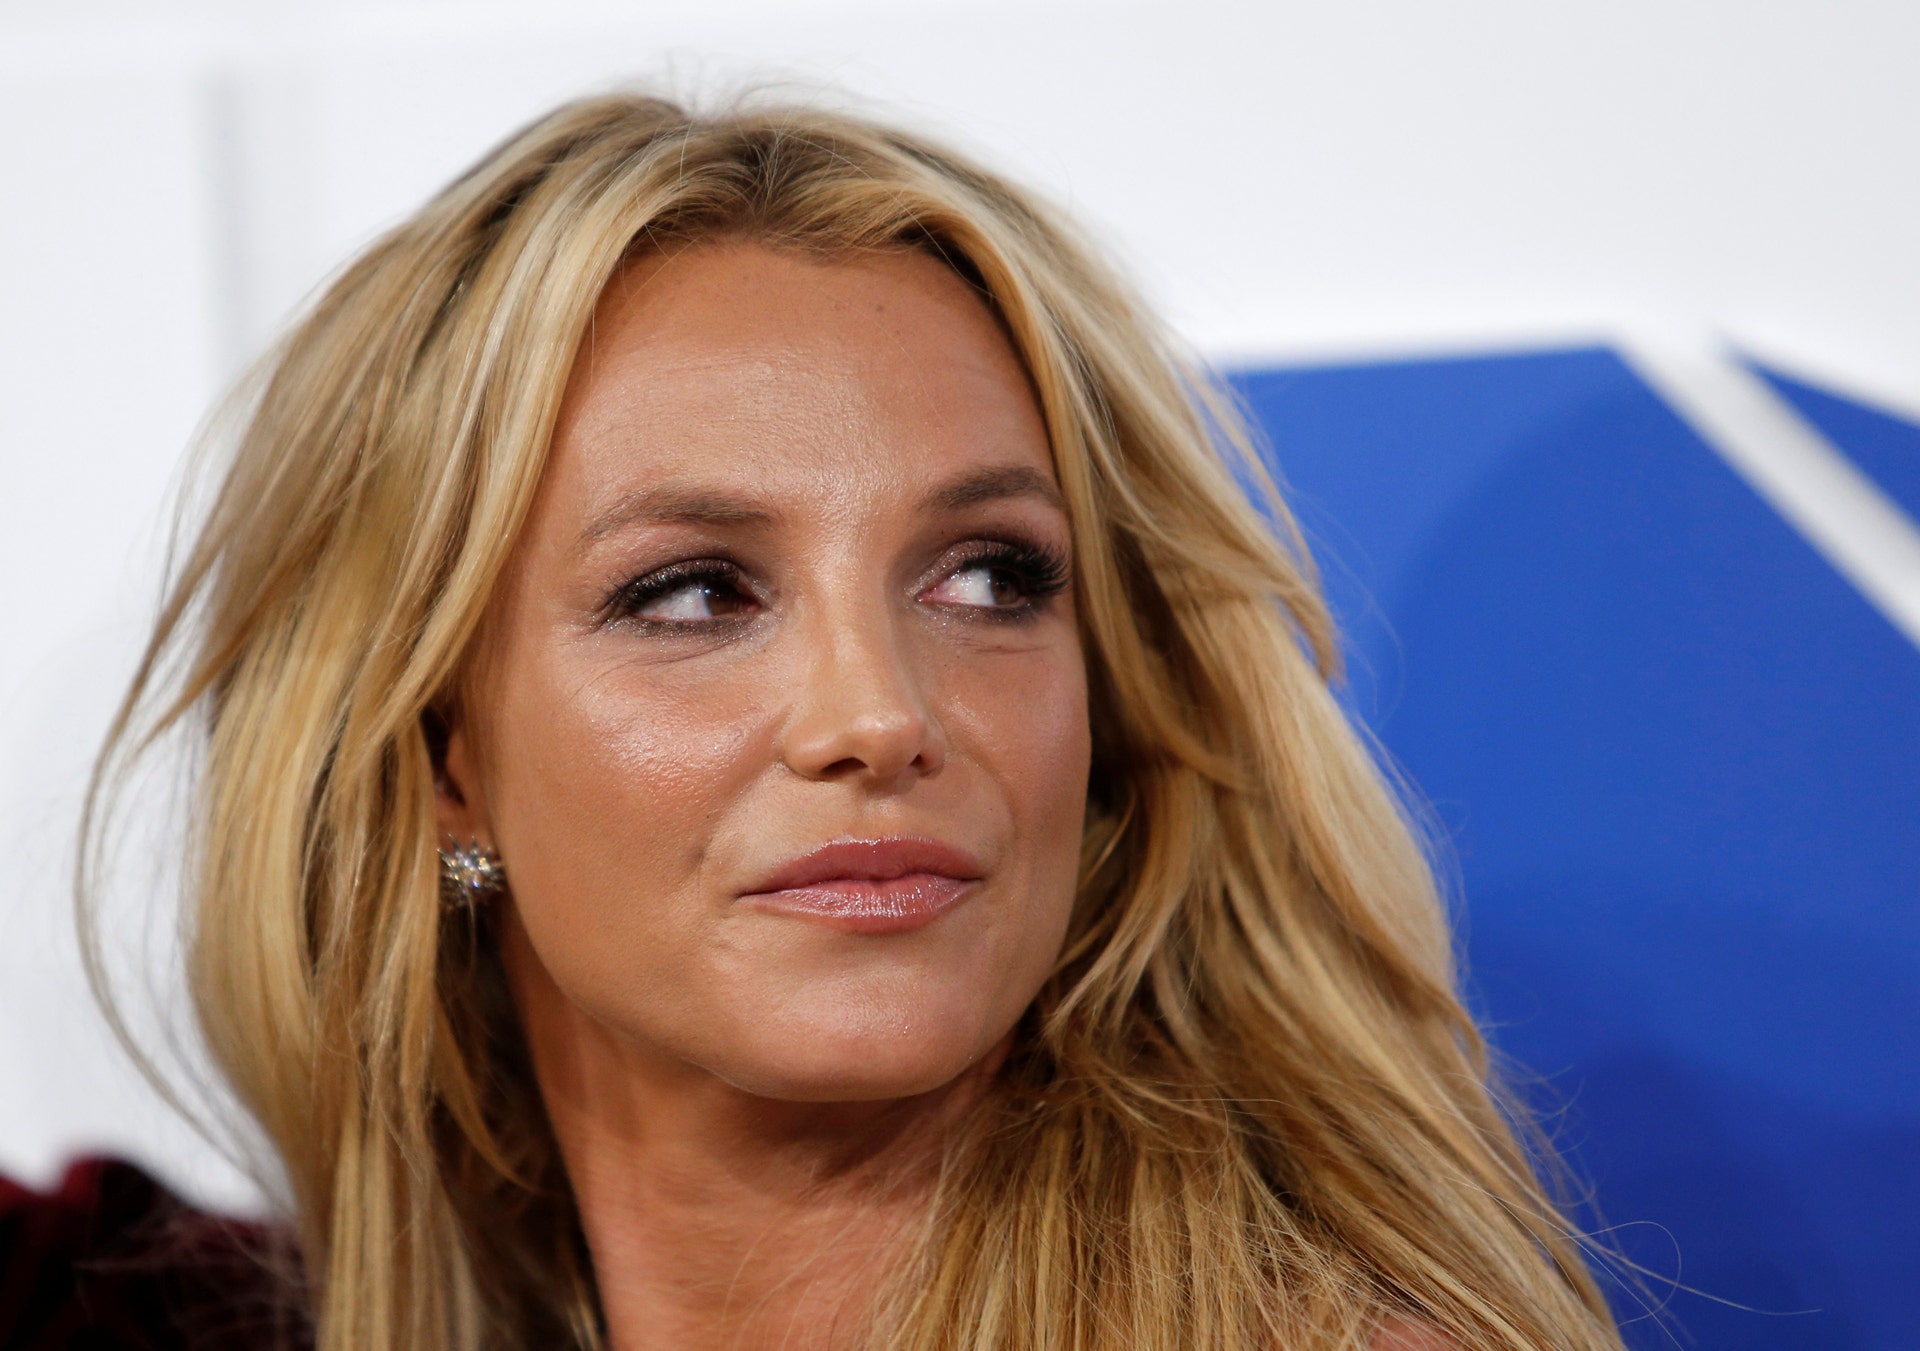 Britney Spears' ex says she wants a baby girl, but is being forced to work: 'I will testify'